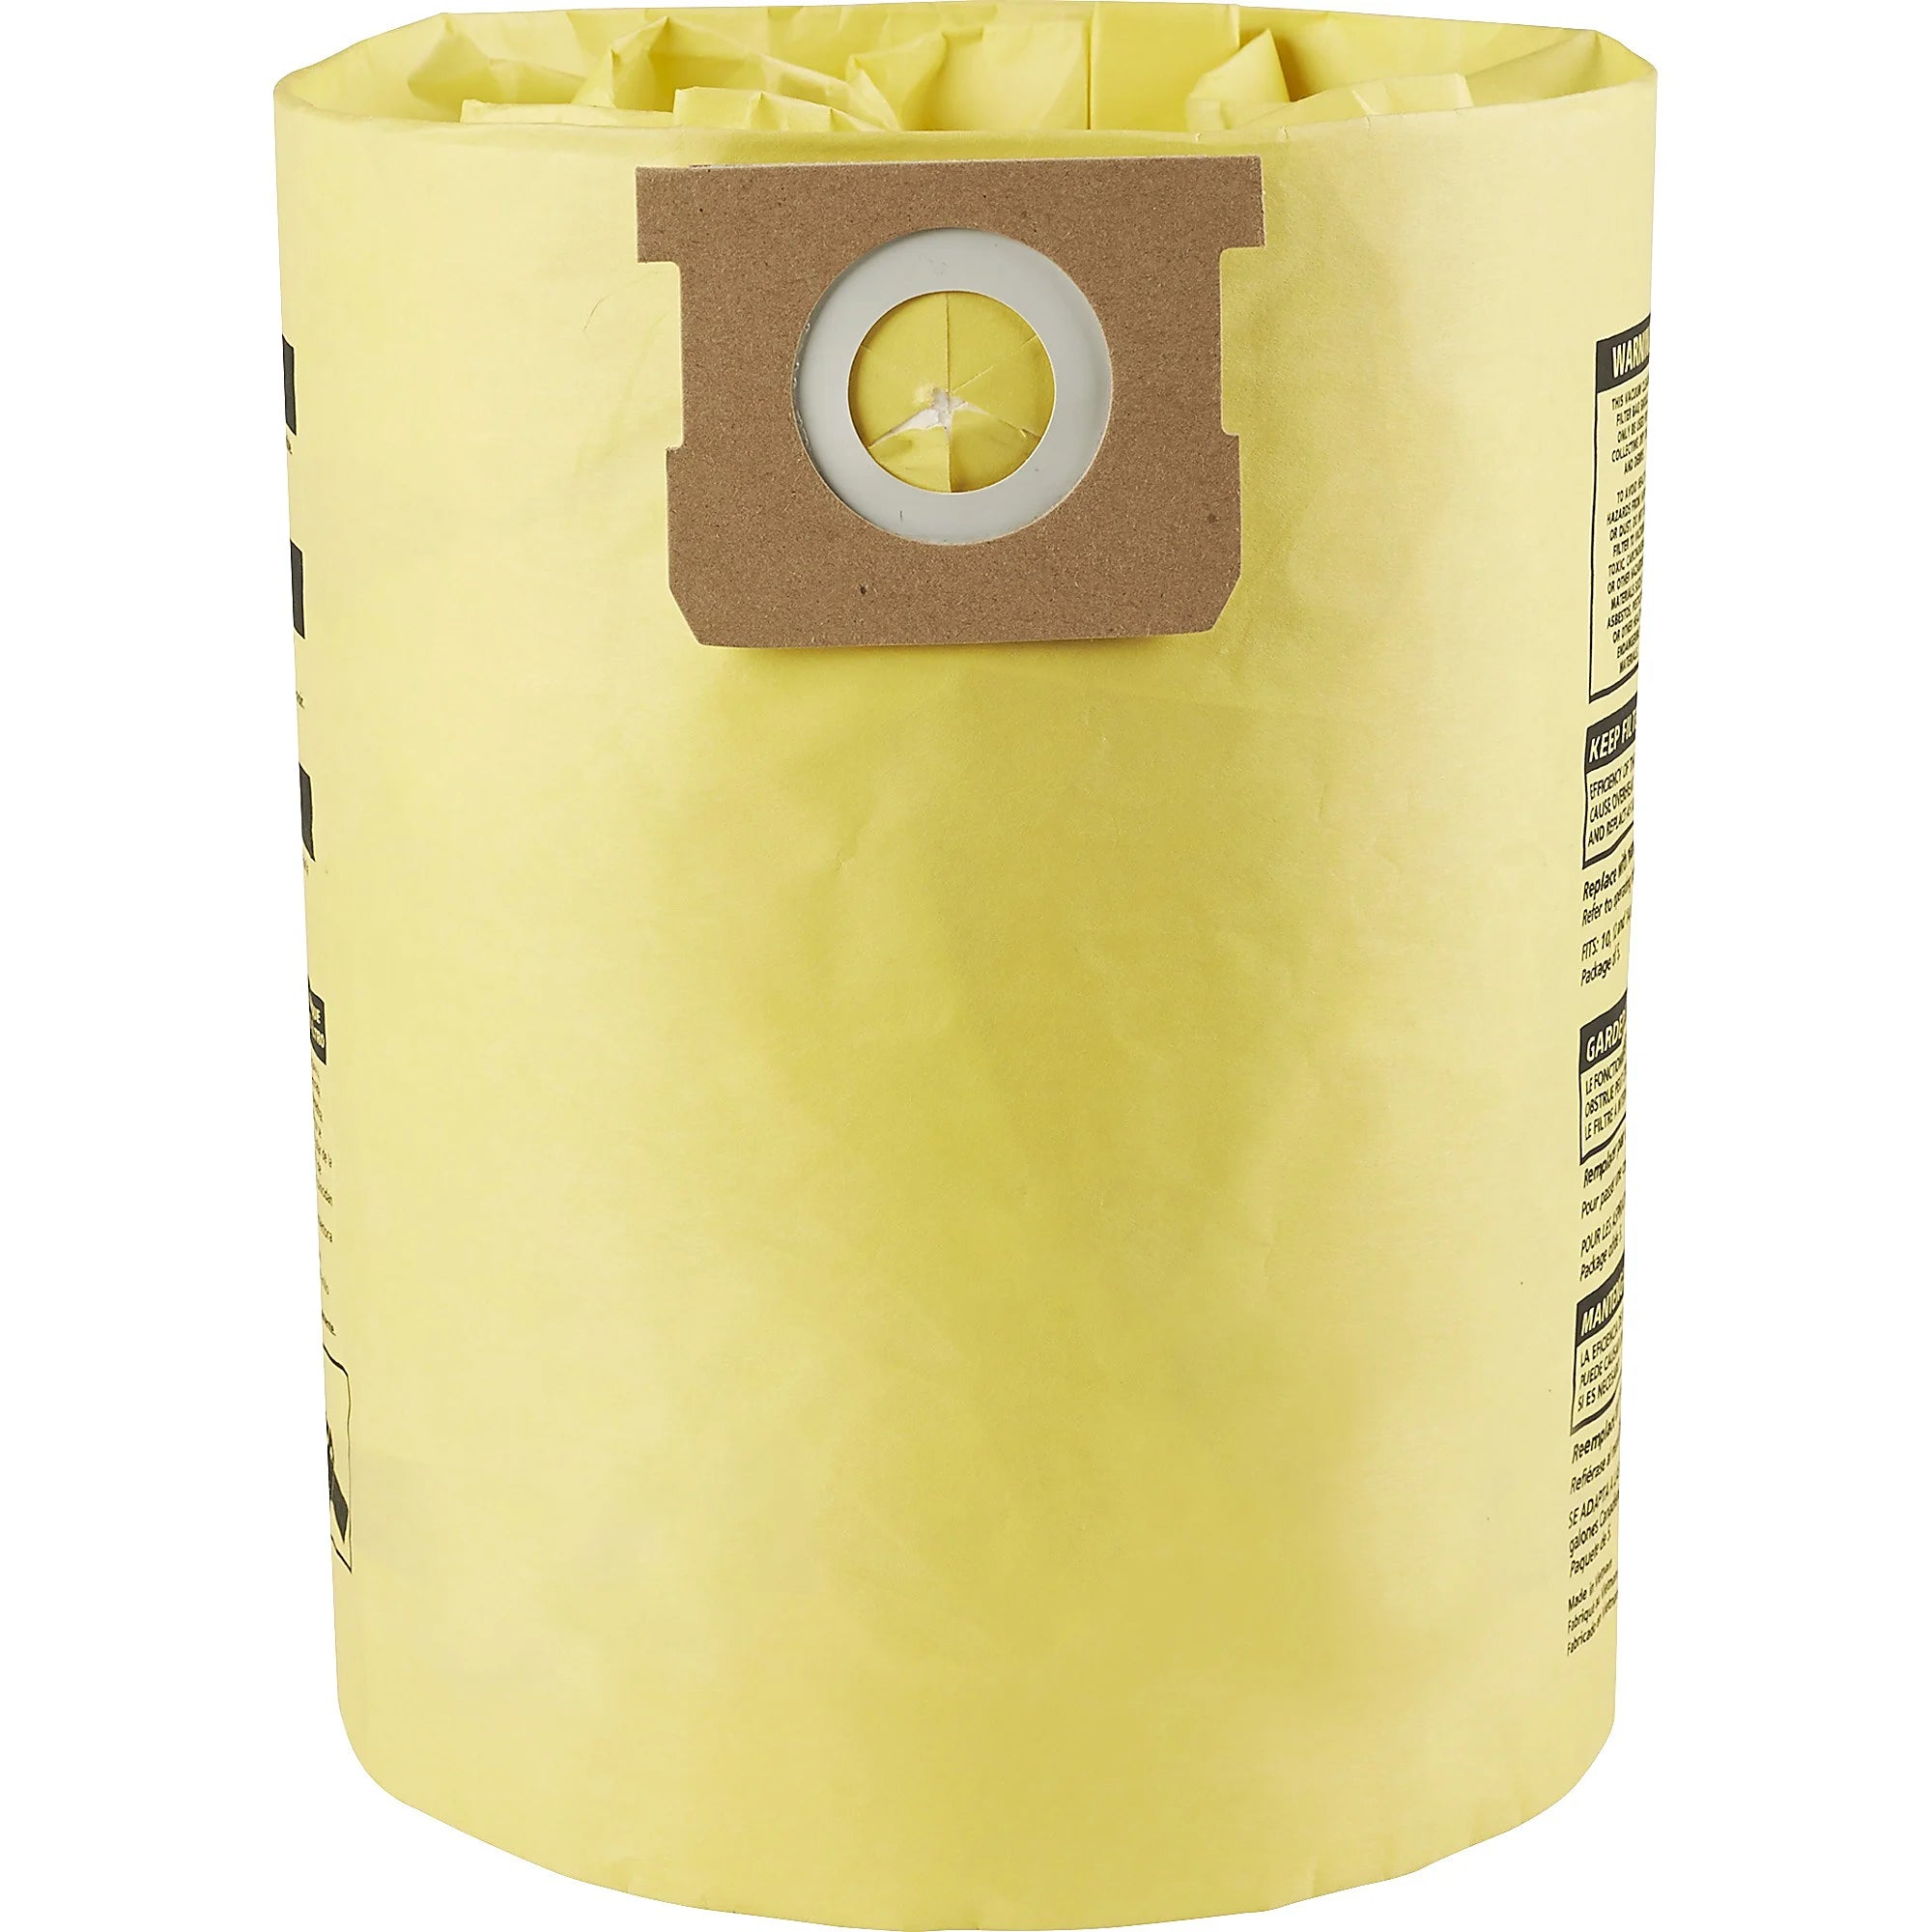 Shop-Vac 90672 Drywall Collection Filter Bags, 10-14 Gallon (Pack of 2)